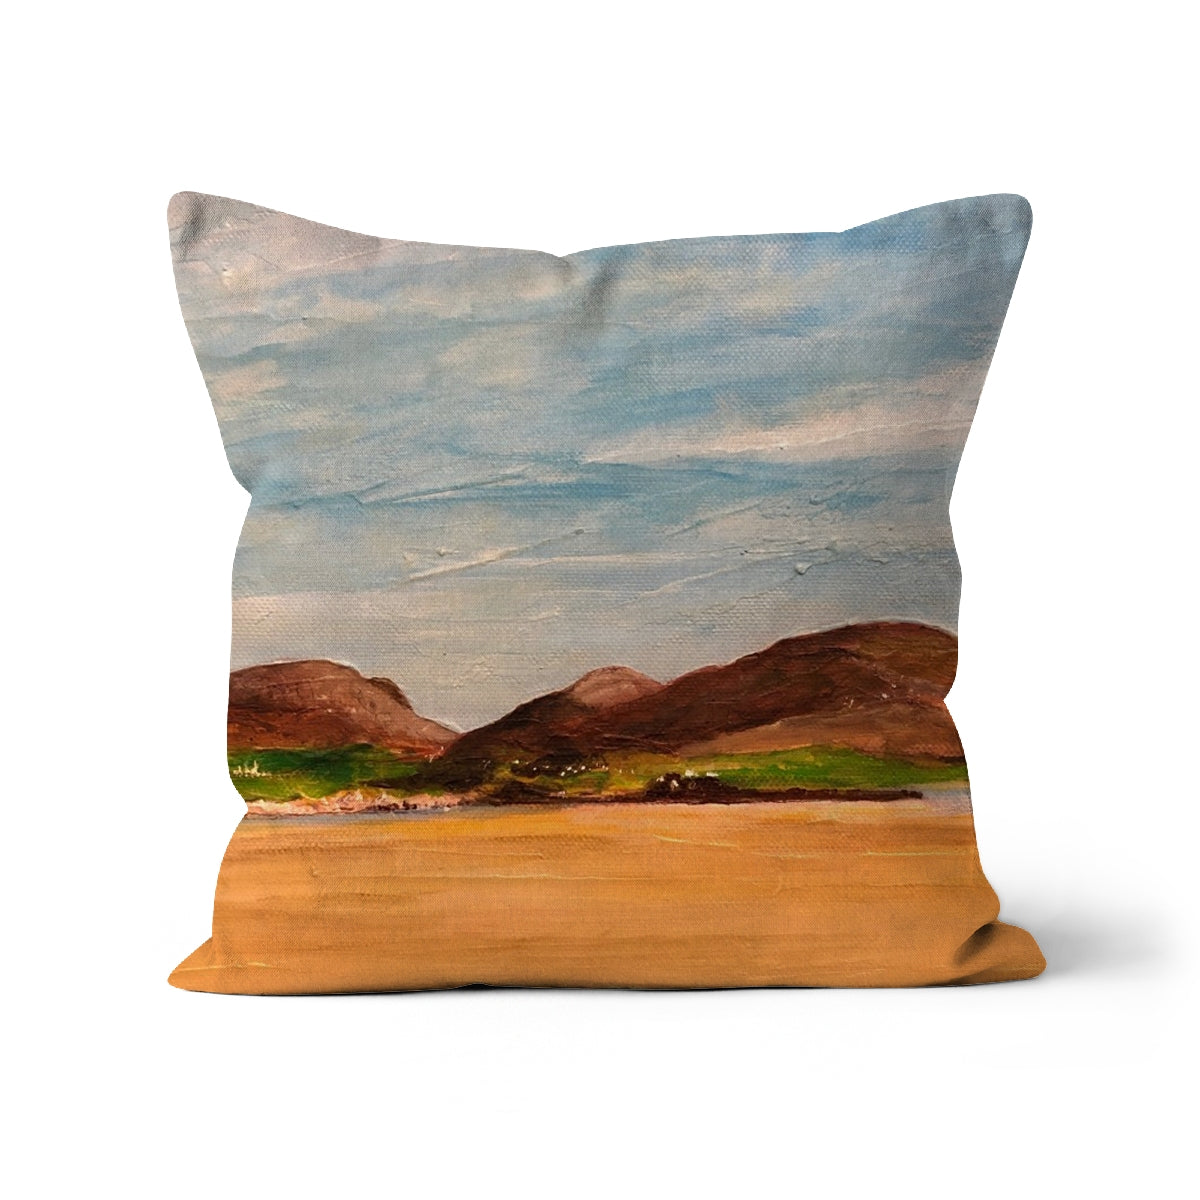 Uig Sands Lewis Art Gifts Cushion-Cushions-Hebridean Islands Art Gallery-Faux Suede-18"x18"-Paintings, Prints, Homeware, Art Gifts From Scotland By Scottish Artist Kevin Hunter